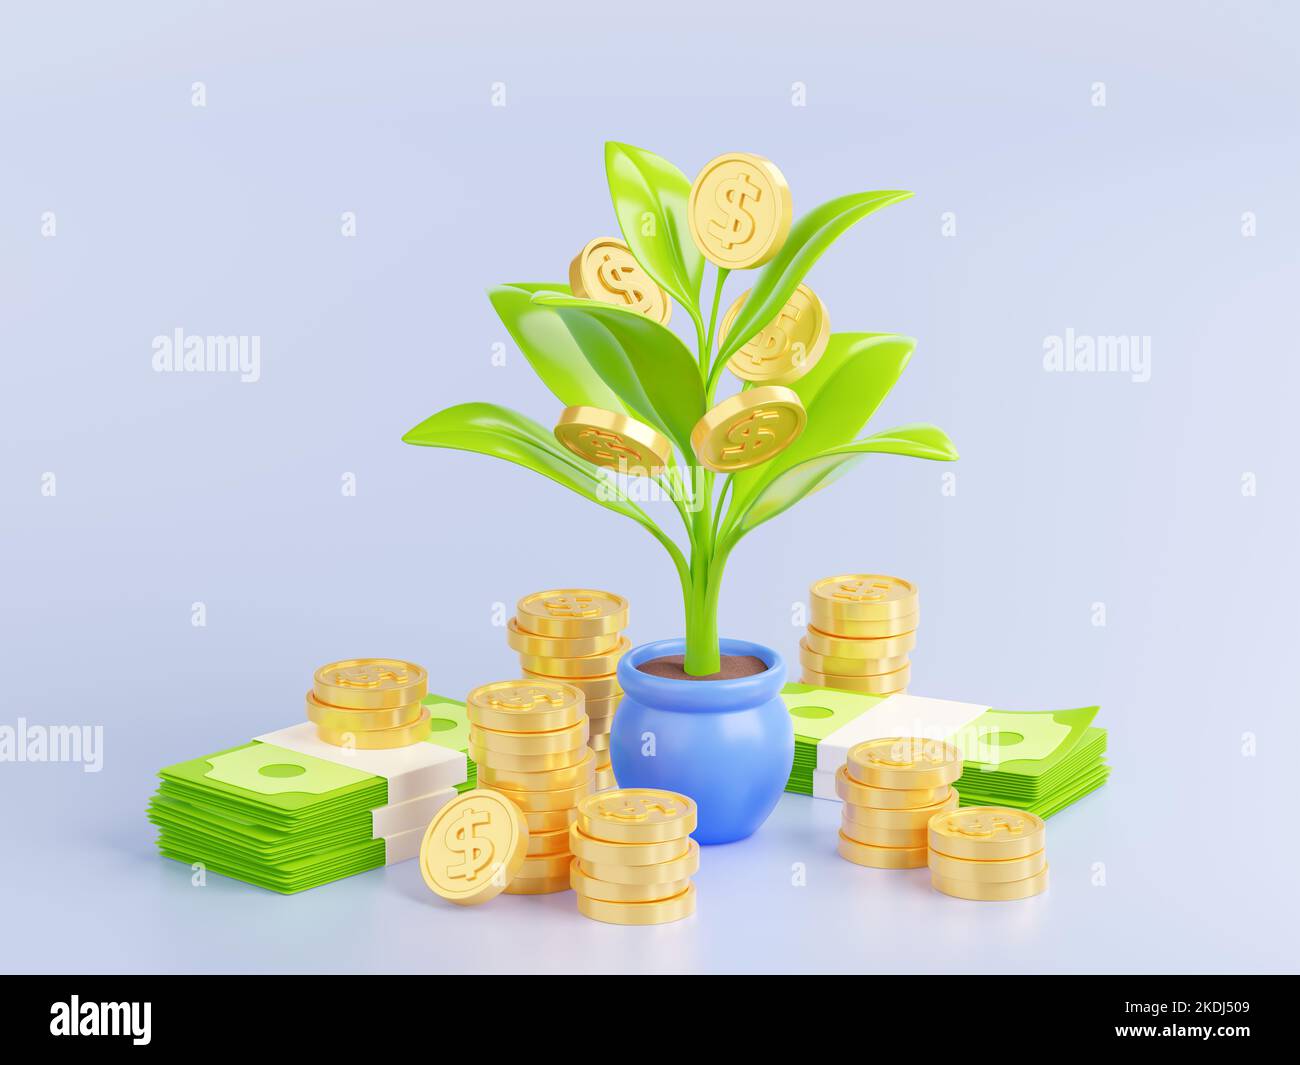 Money tree 3d render concept with potted plant with gold coins on branches and scatter around with dollar bills. Investment, financial wealth, savings, isolated illustration in cartoon plastic style Stock Photo